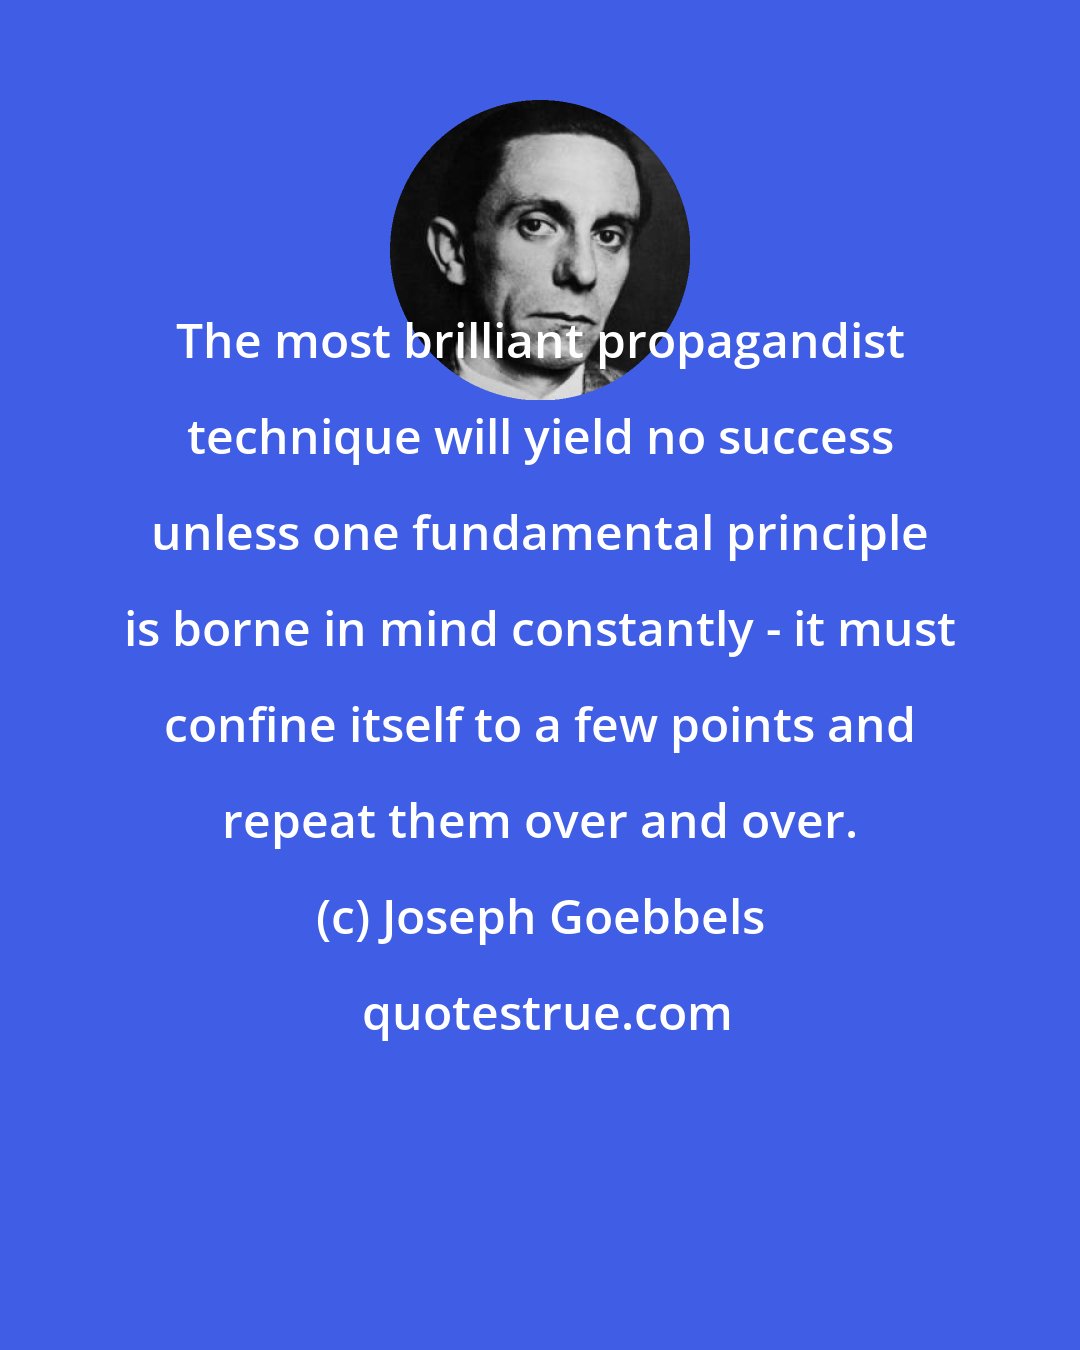 Joseph Goebbels: The most brilliant propagandist technique will yield no success unless one fundamental principle is borne in mind constantly - it must confine itself to a few points and repeat them over and over.